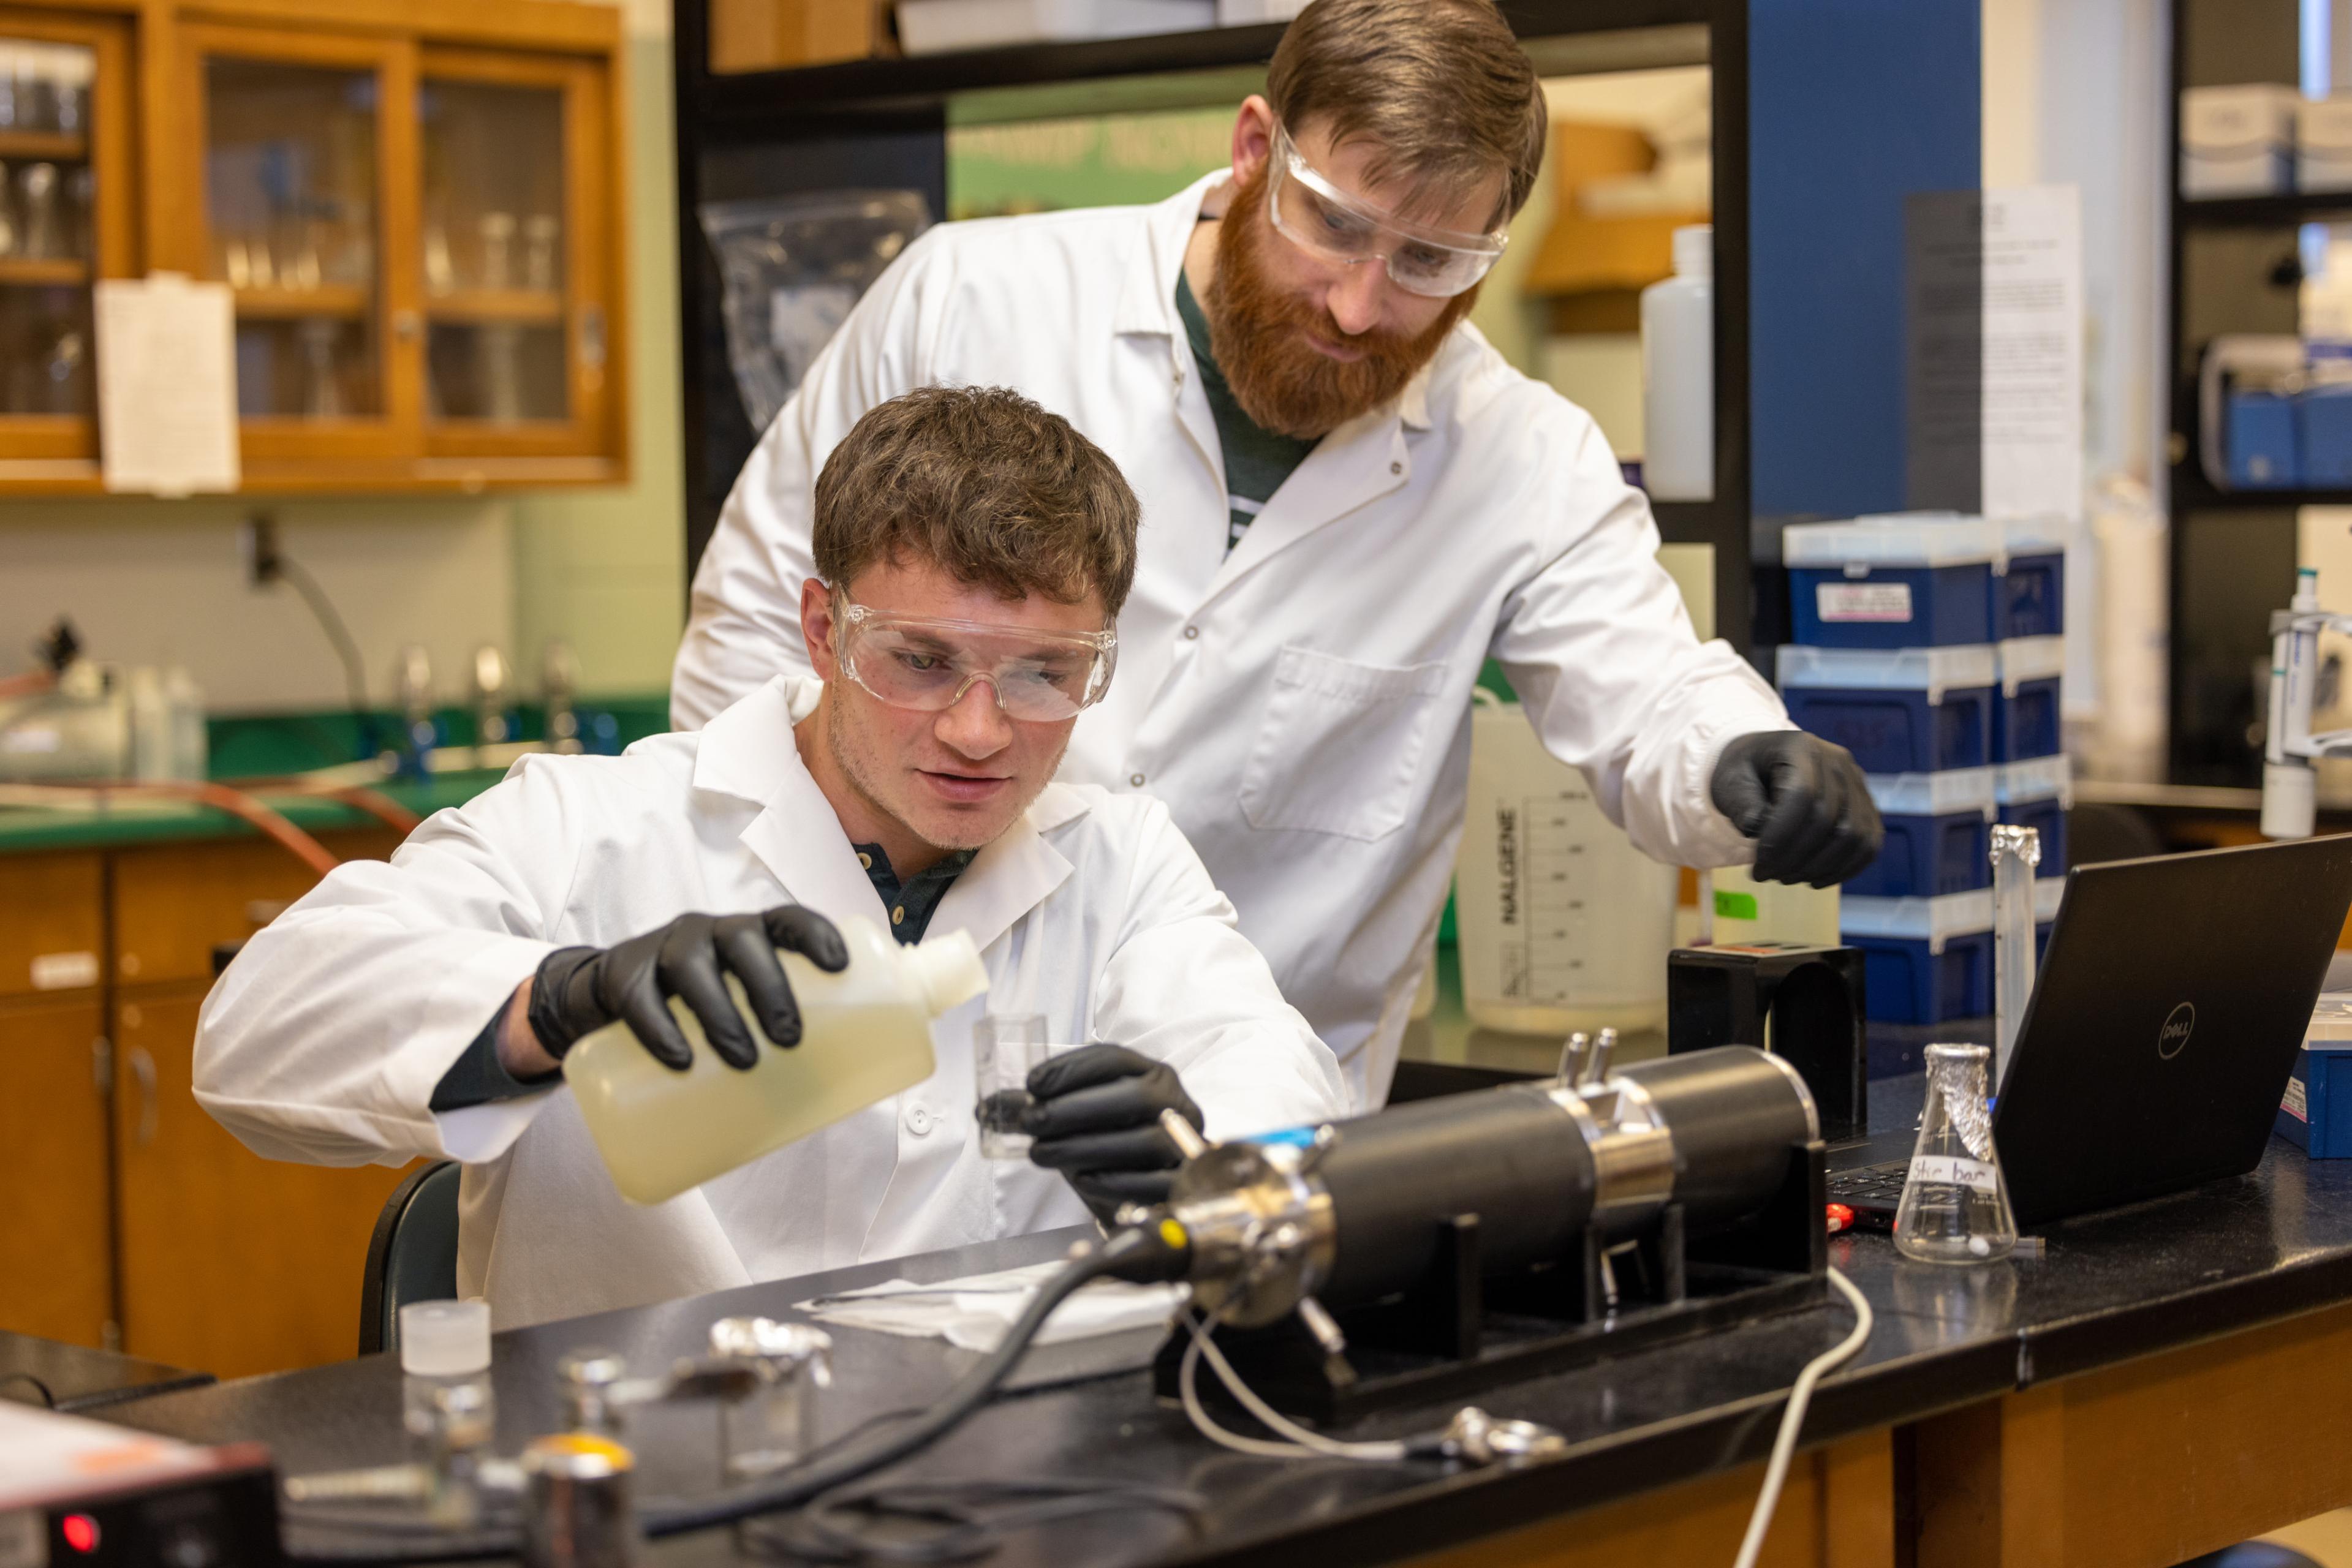 Two students measure chemicals in the lab